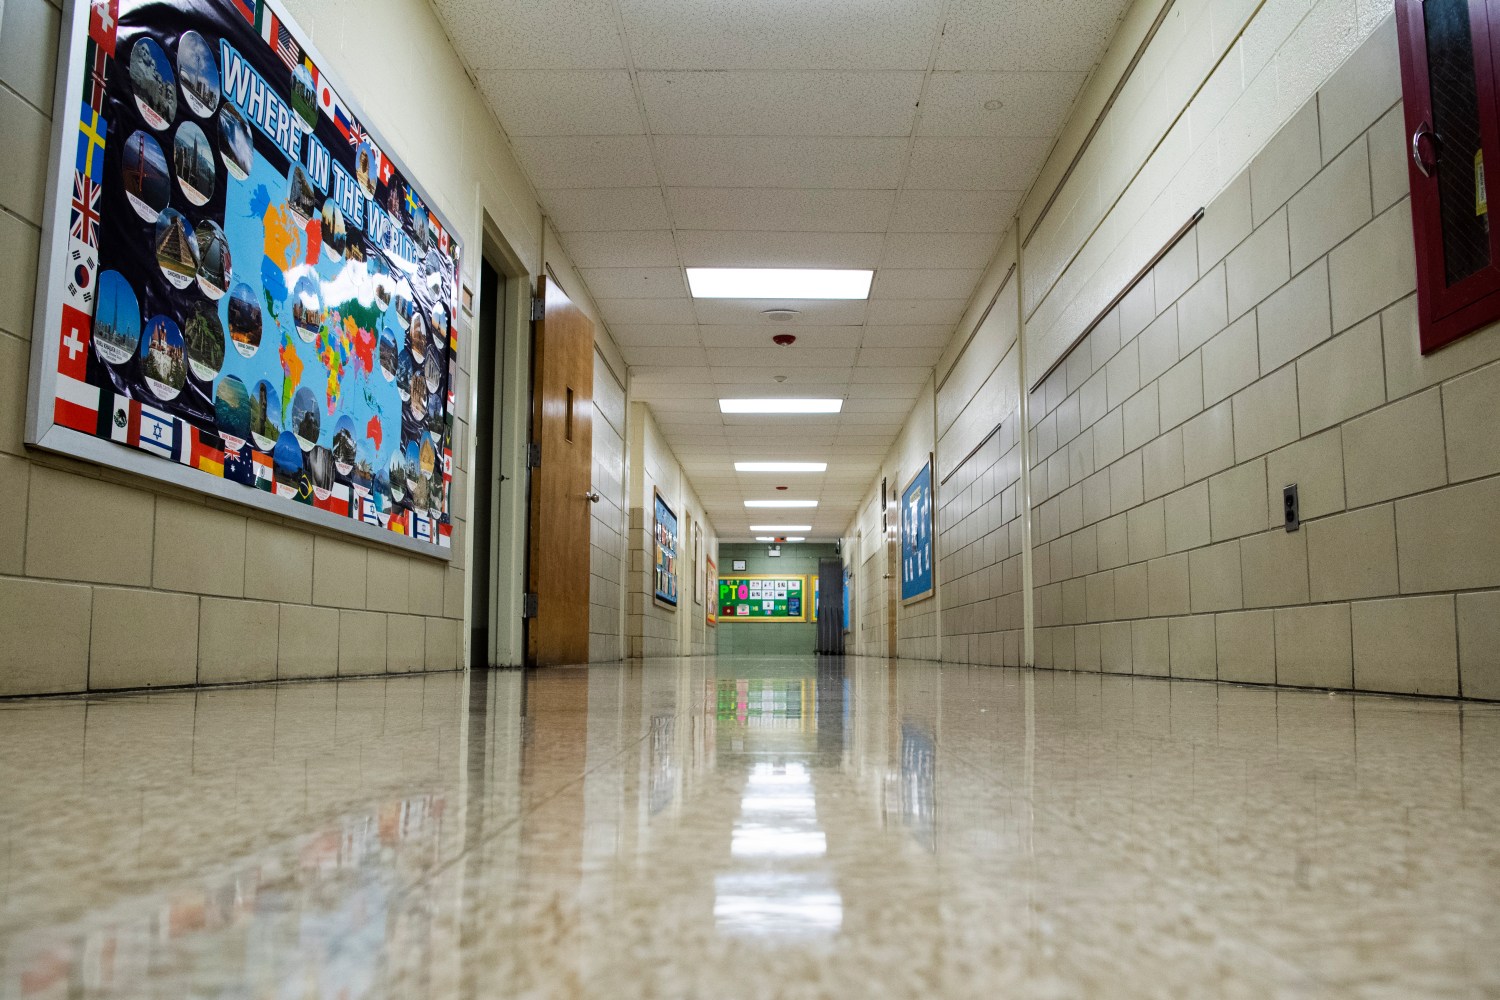 UNITED STATES - AUGUST 26: An empty hallway is pictured at Heather Hills Elementary School as officials conduct a materials distribution for parents to pick up for distance learning in Bowie, Md., on Wednesday, August 26, 2020. (Photo By Tom Williams/CQ Roll Call/Sipa USA)No Use UK. No Use Germany.